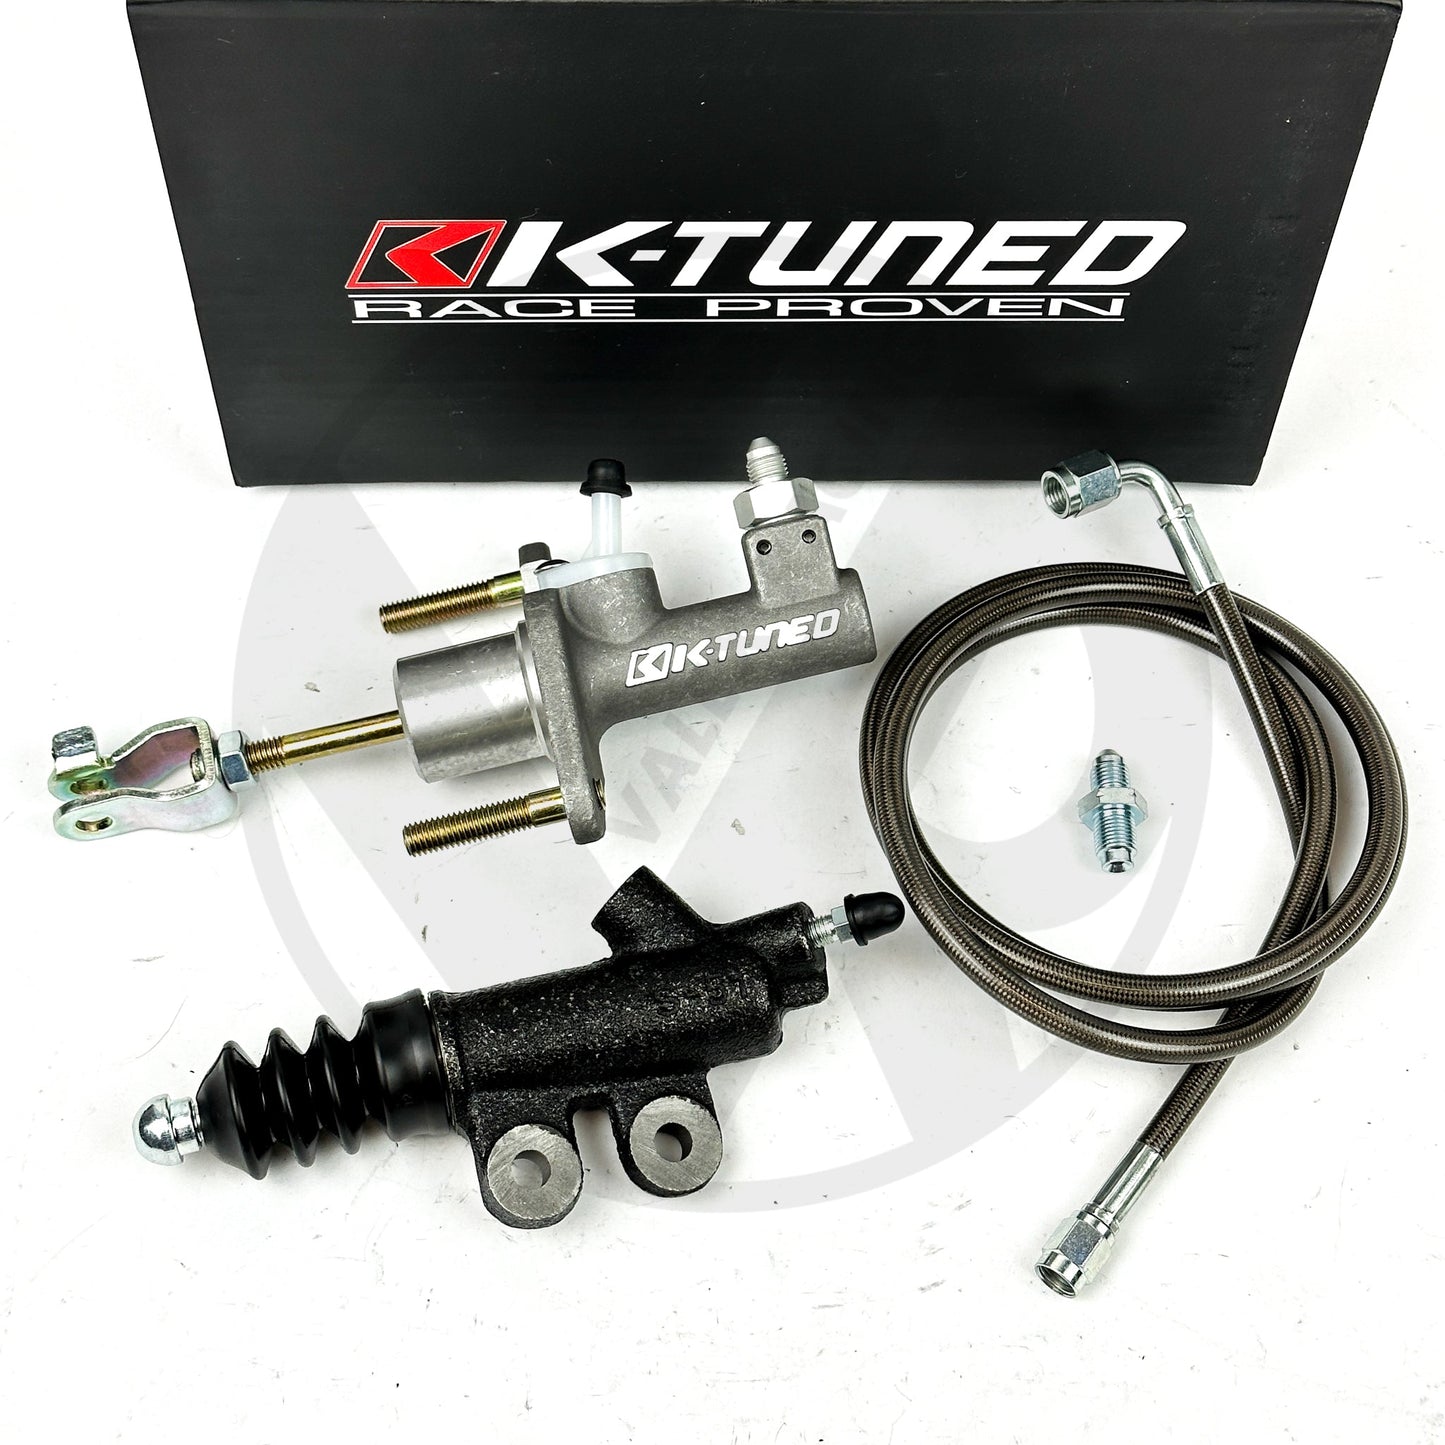 K-Tuned EM2 Clutch Master Exedy Slave Kit for 96-00 Honda Civic EK with Stainless Steel Clutch Line